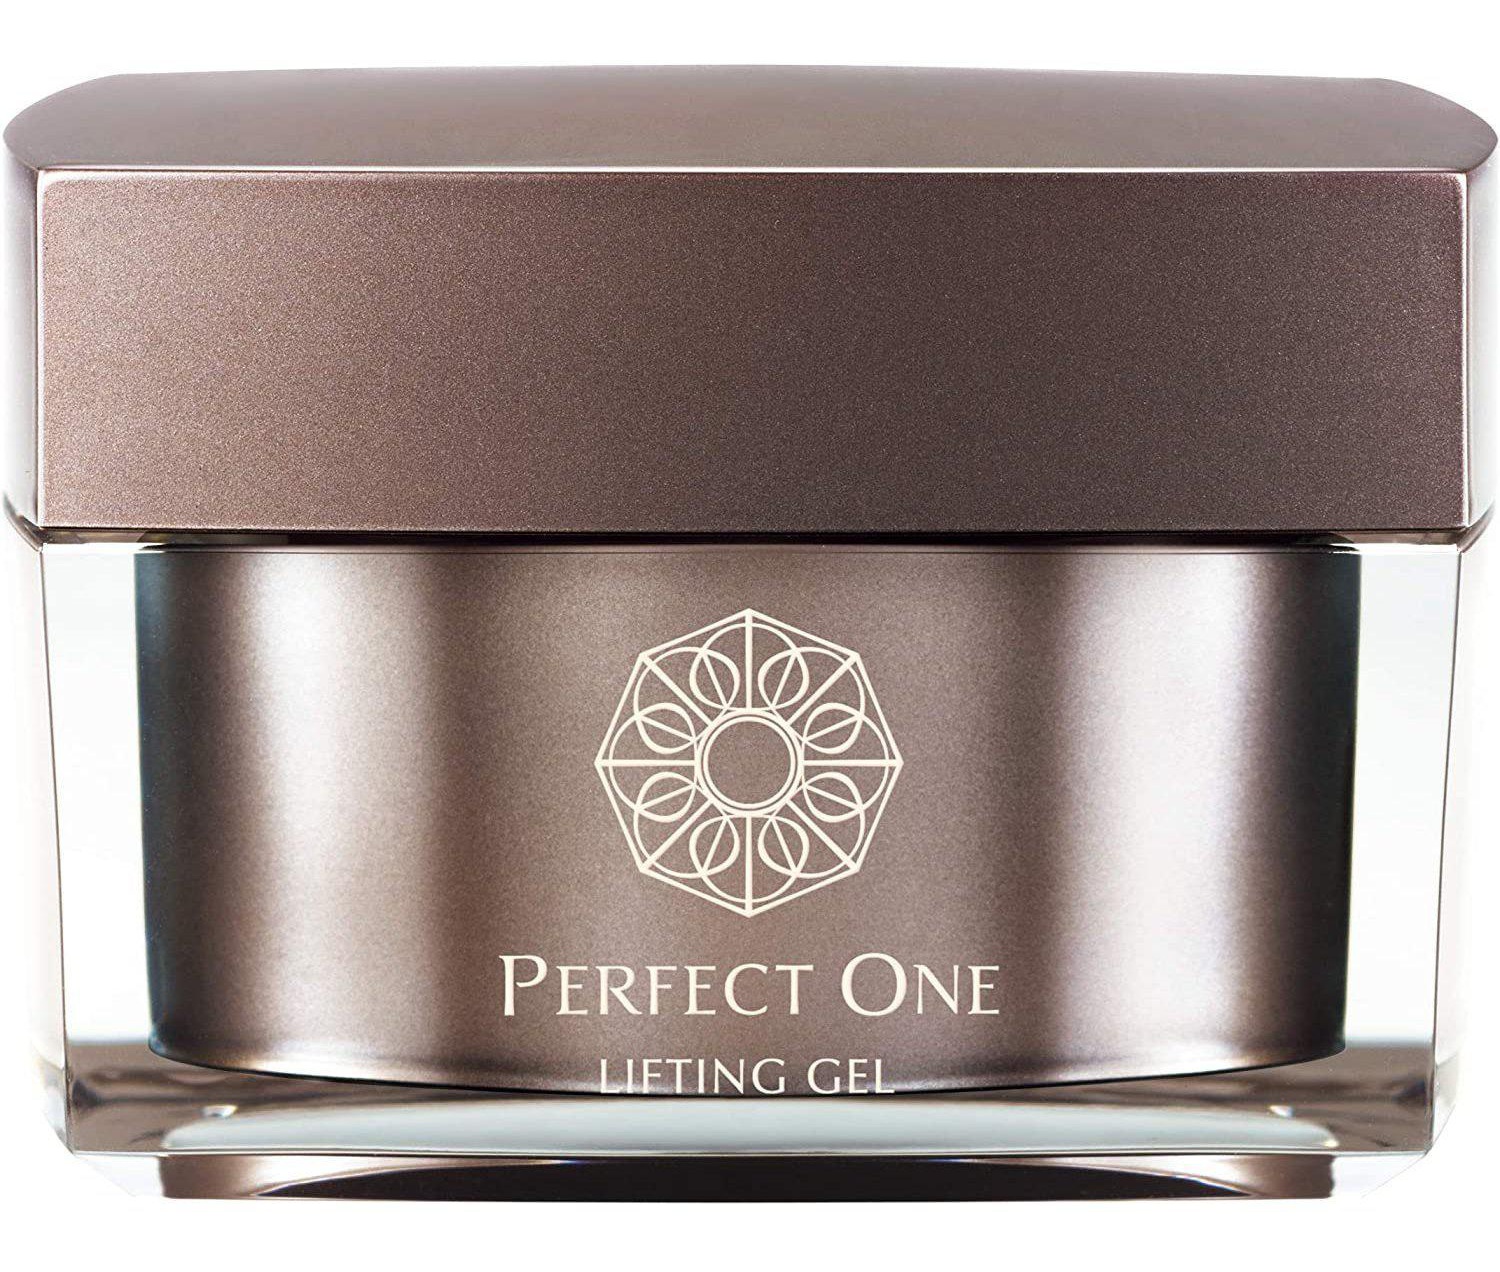 PERFECT ONE Lifting Gel